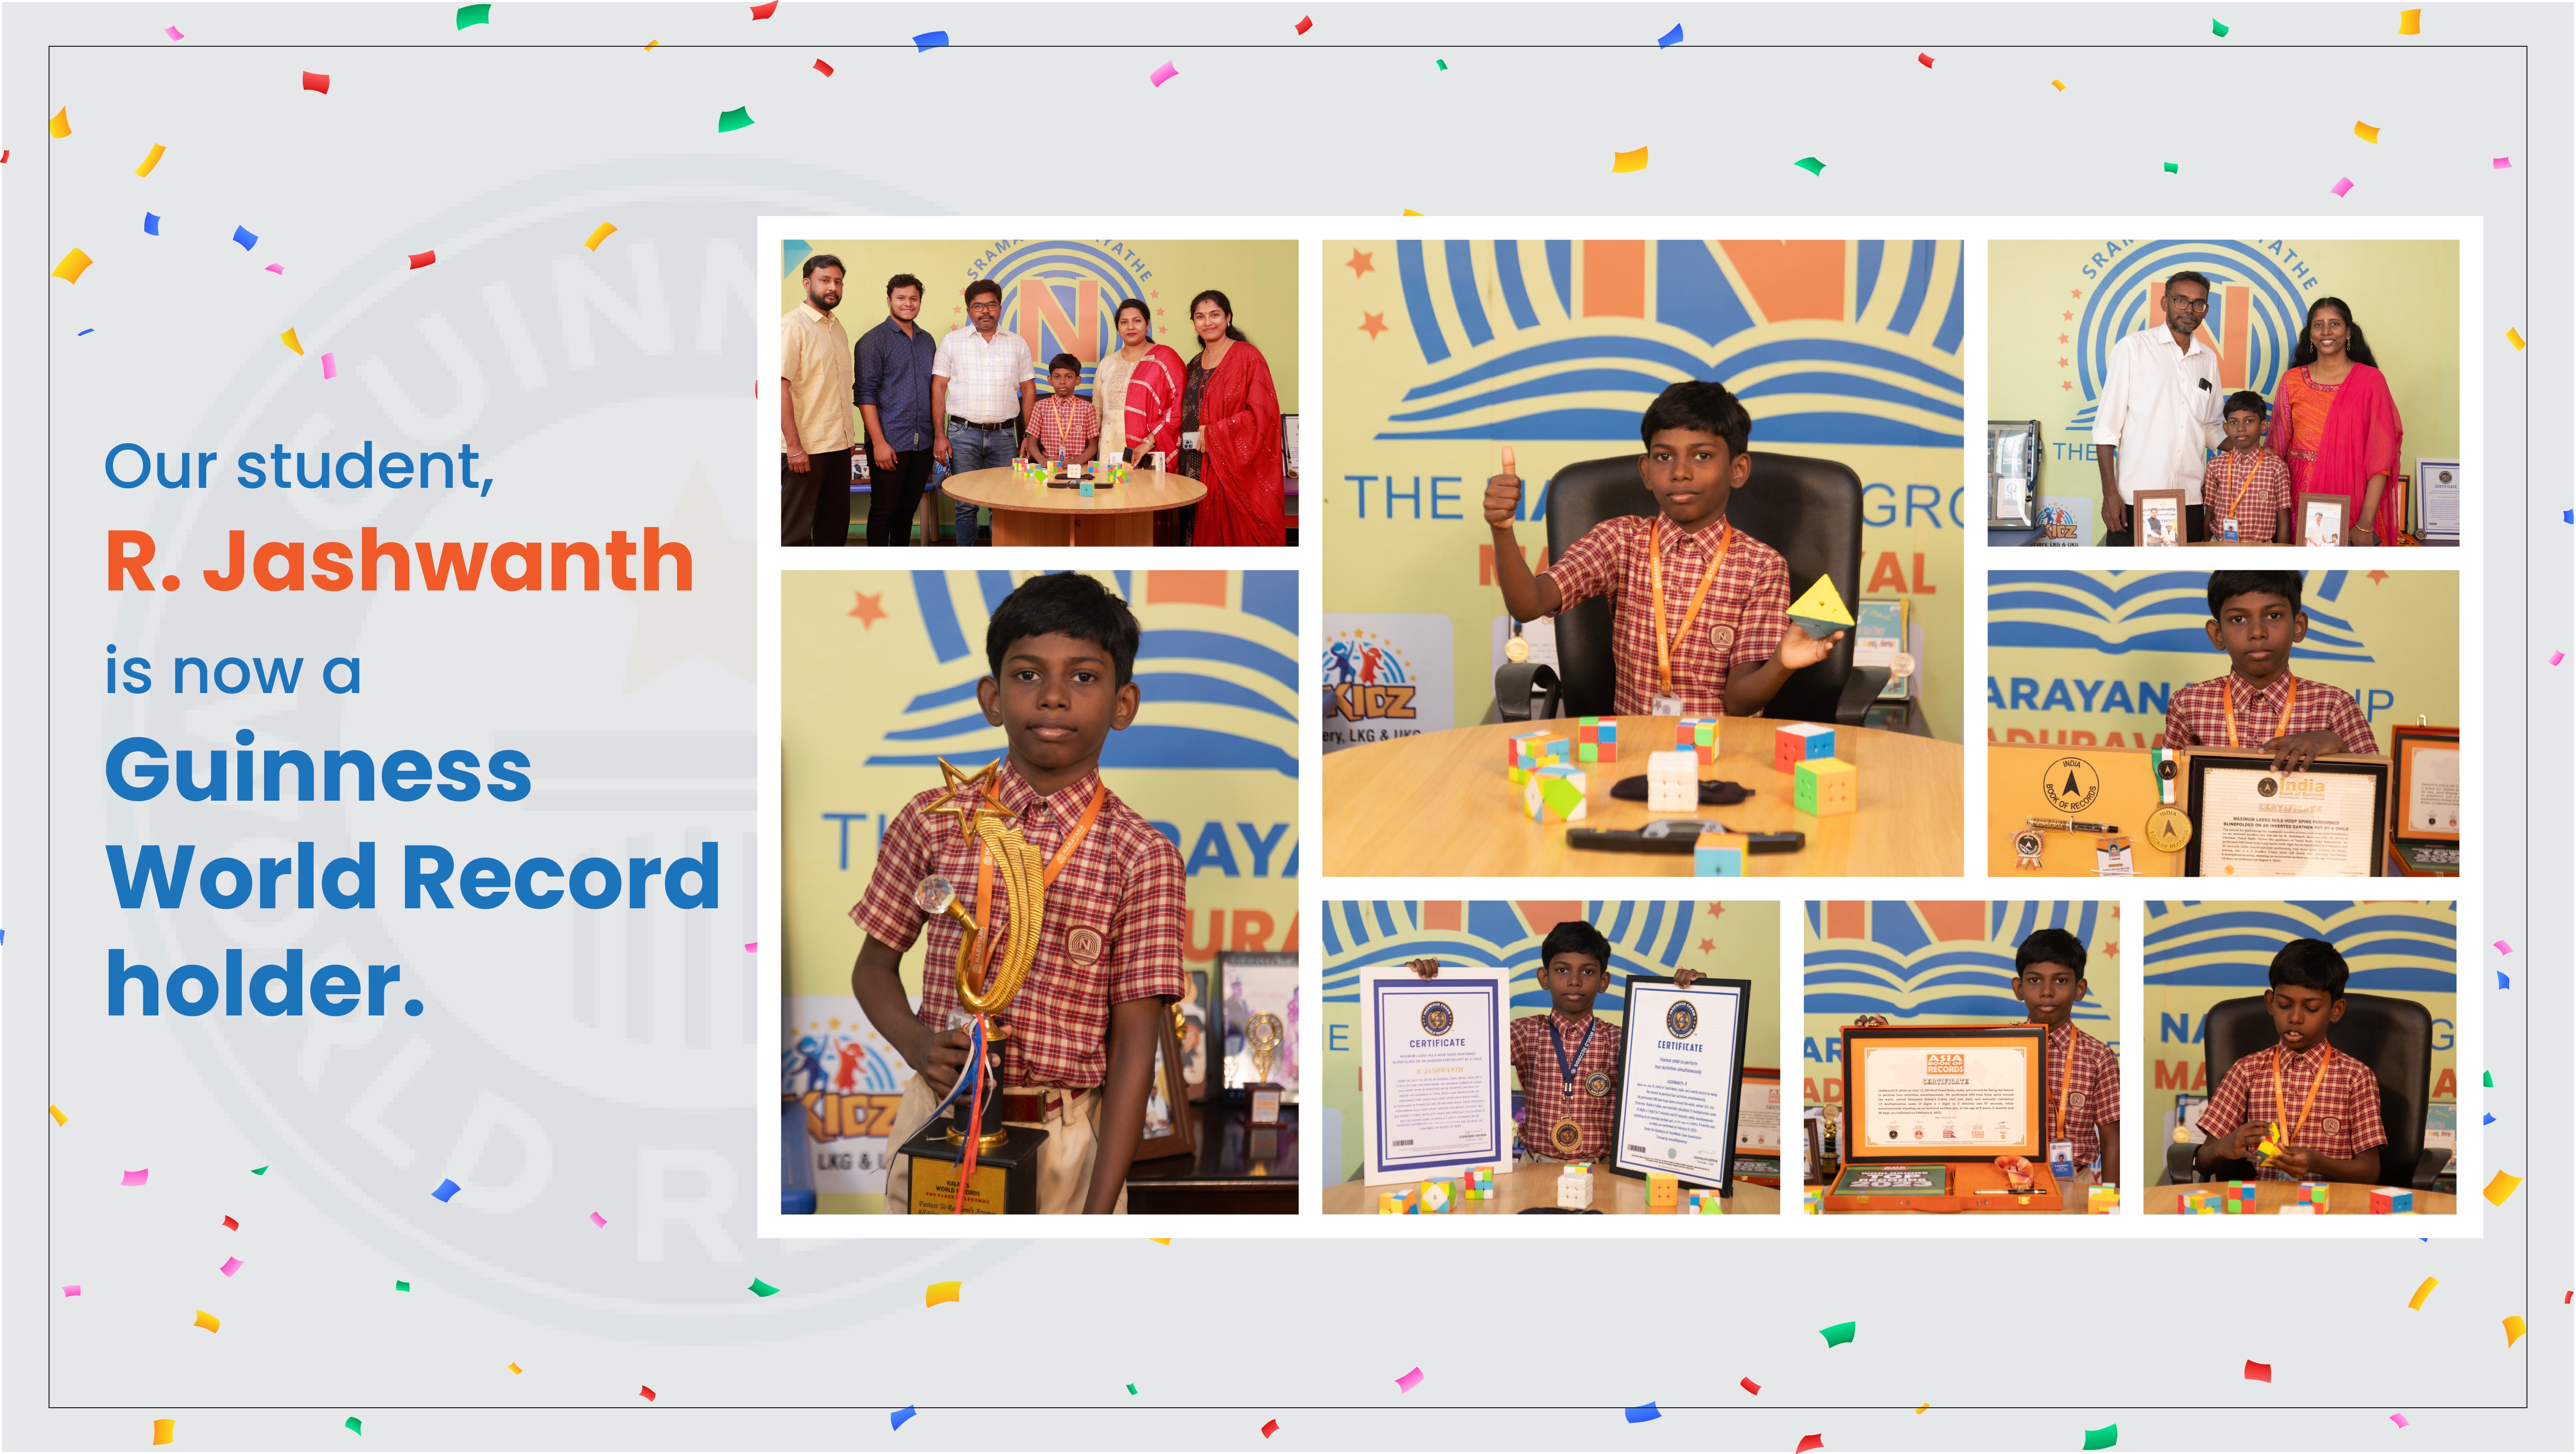 YOUNG NARAYANITE IS A GUINNESS WORLD RECORD HOLDER